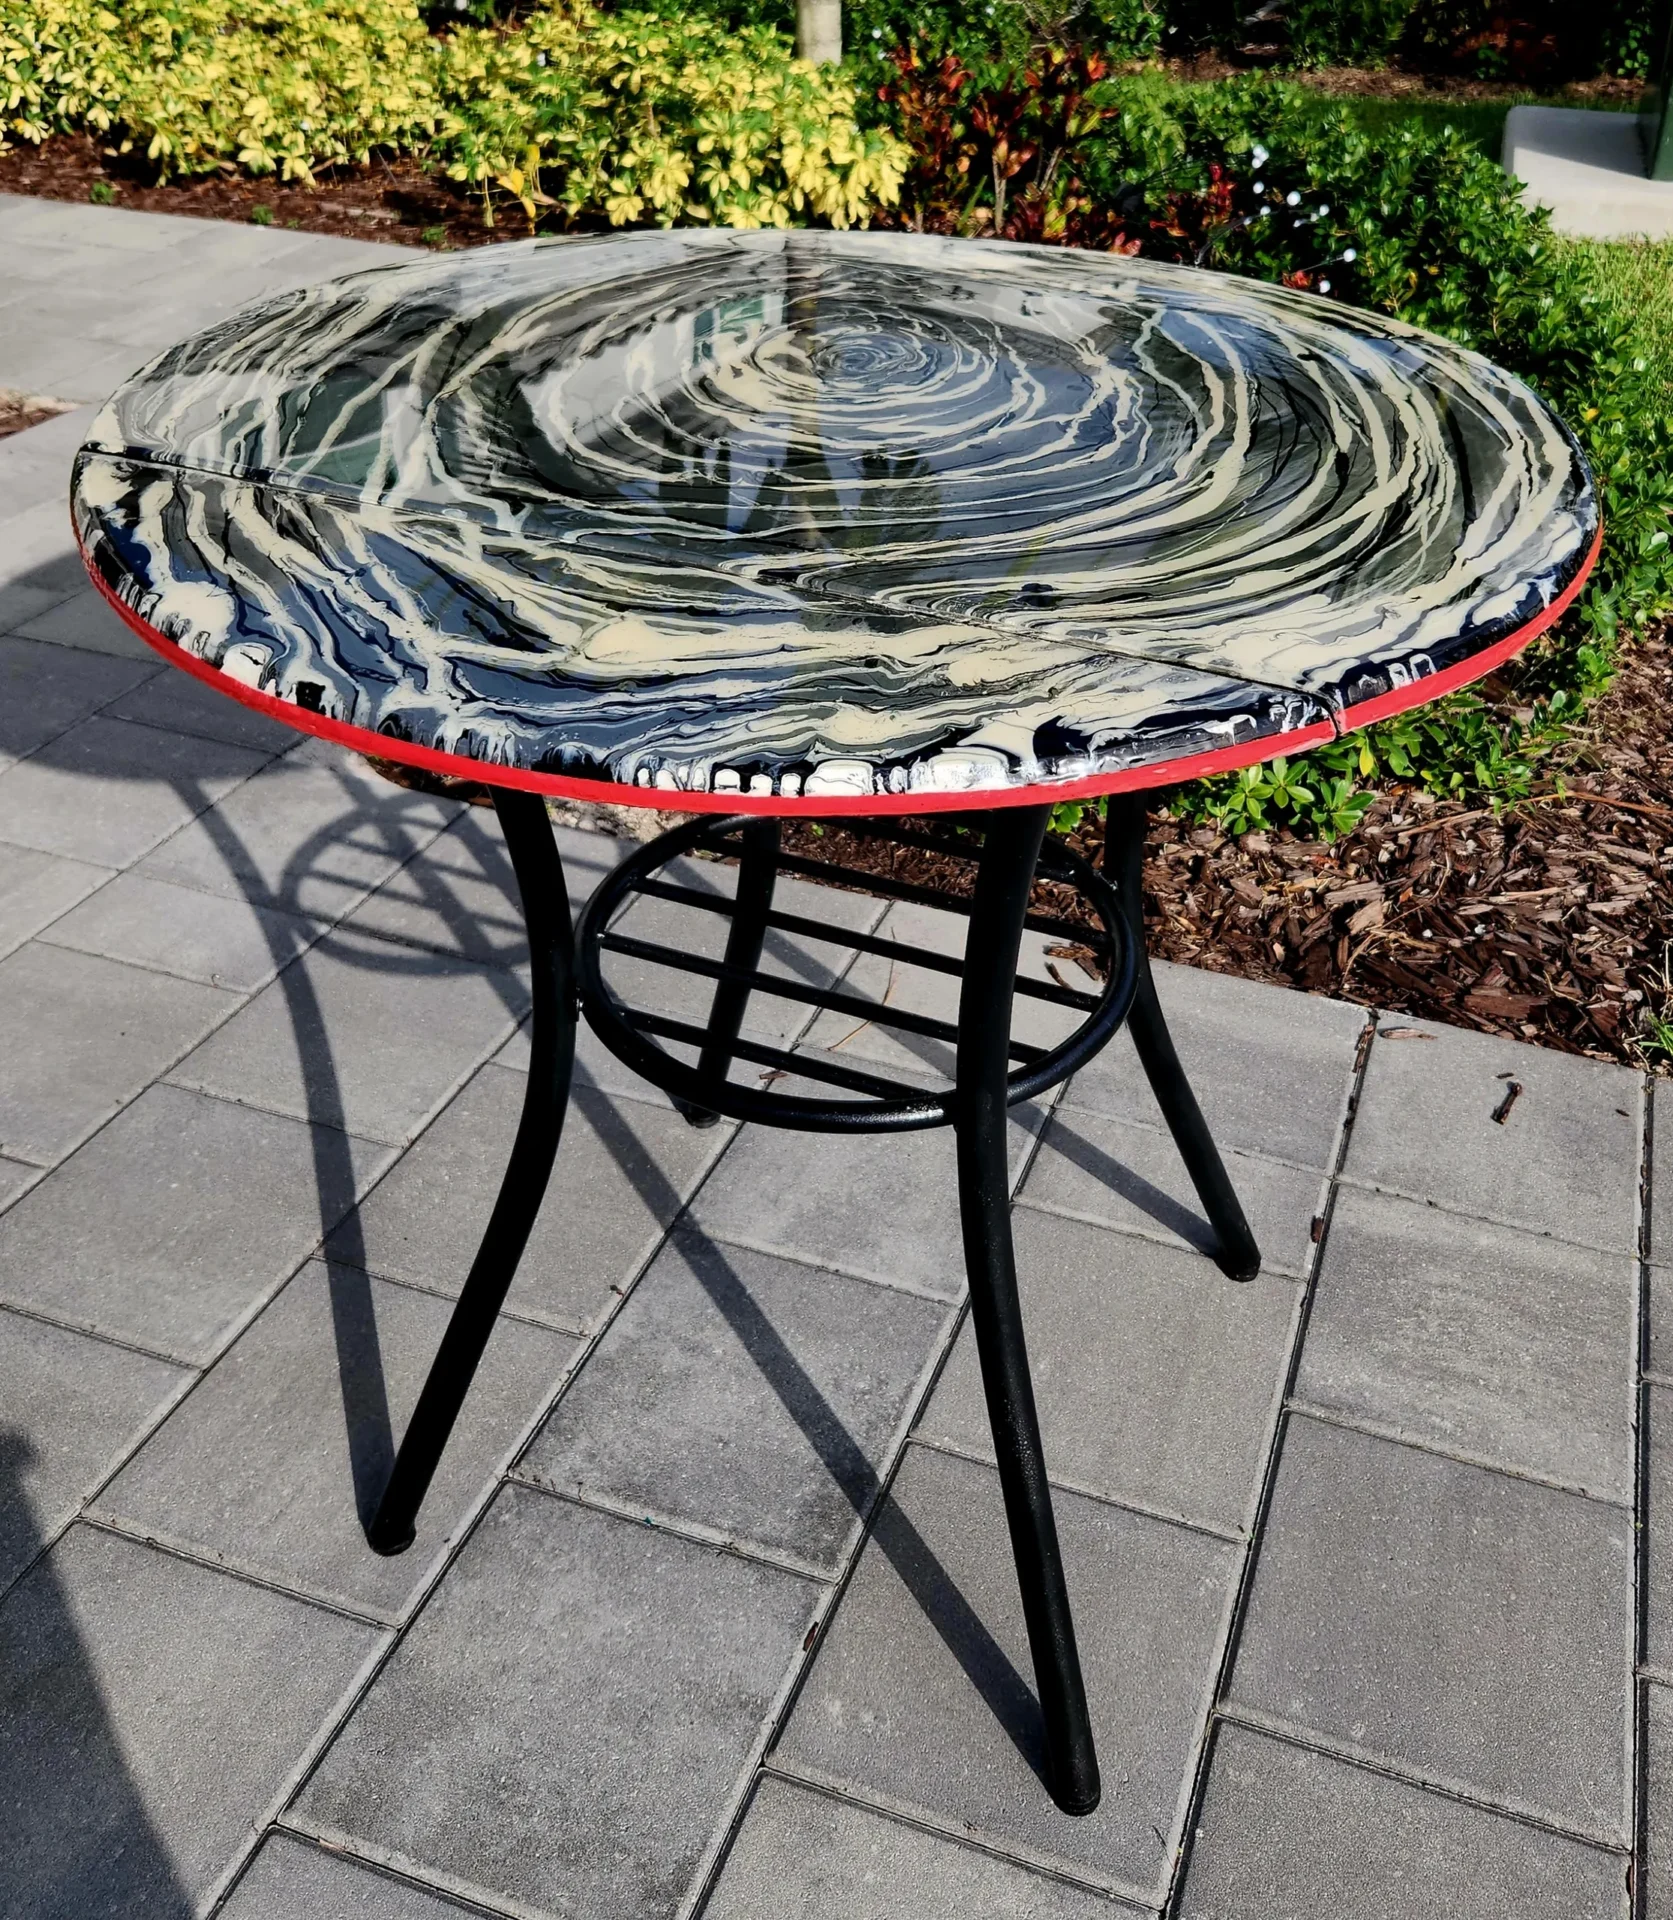 A table with a black and red frame on top of it.